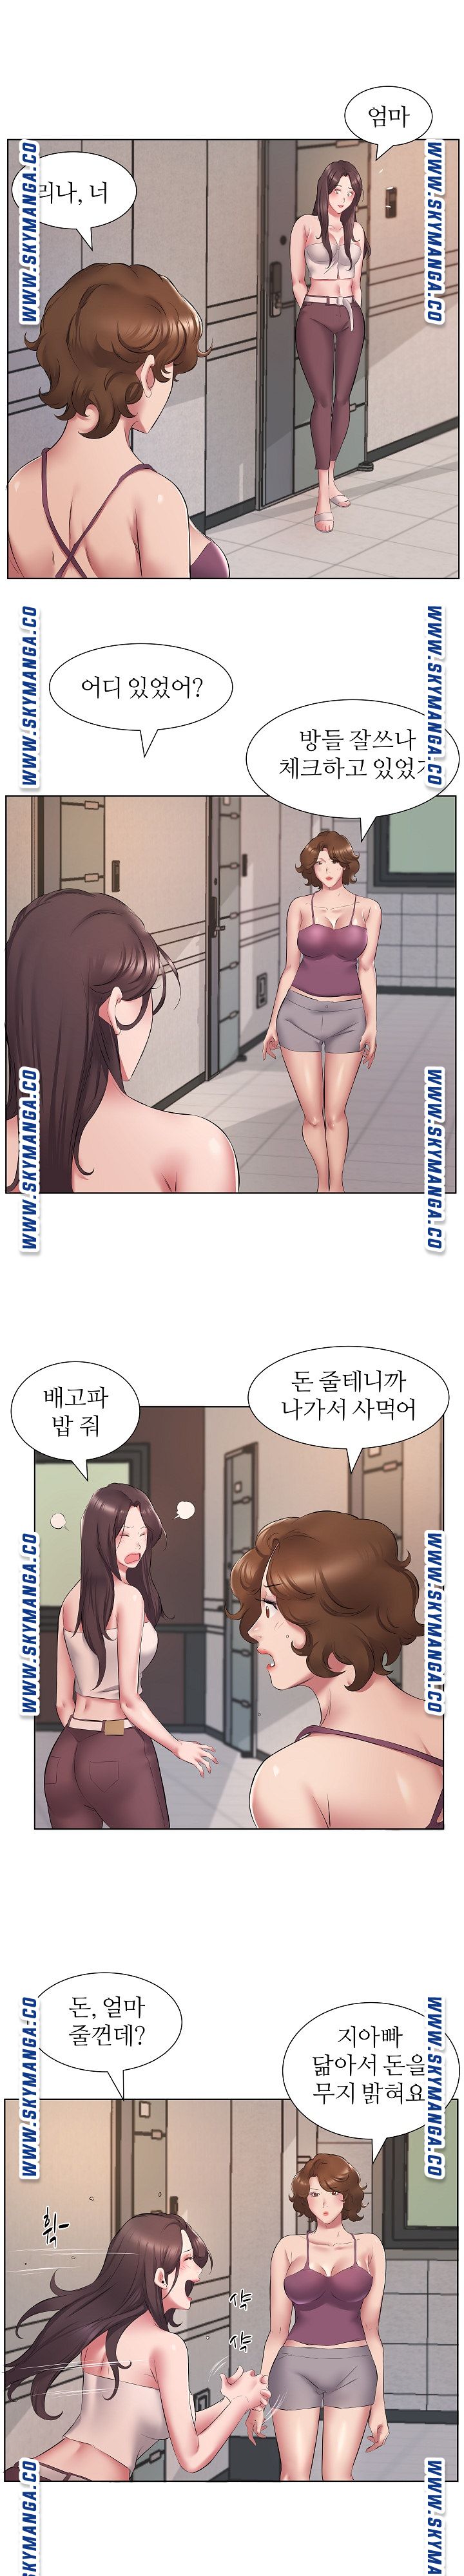 One Room Hotel Raw - Chapter 5 Page 4